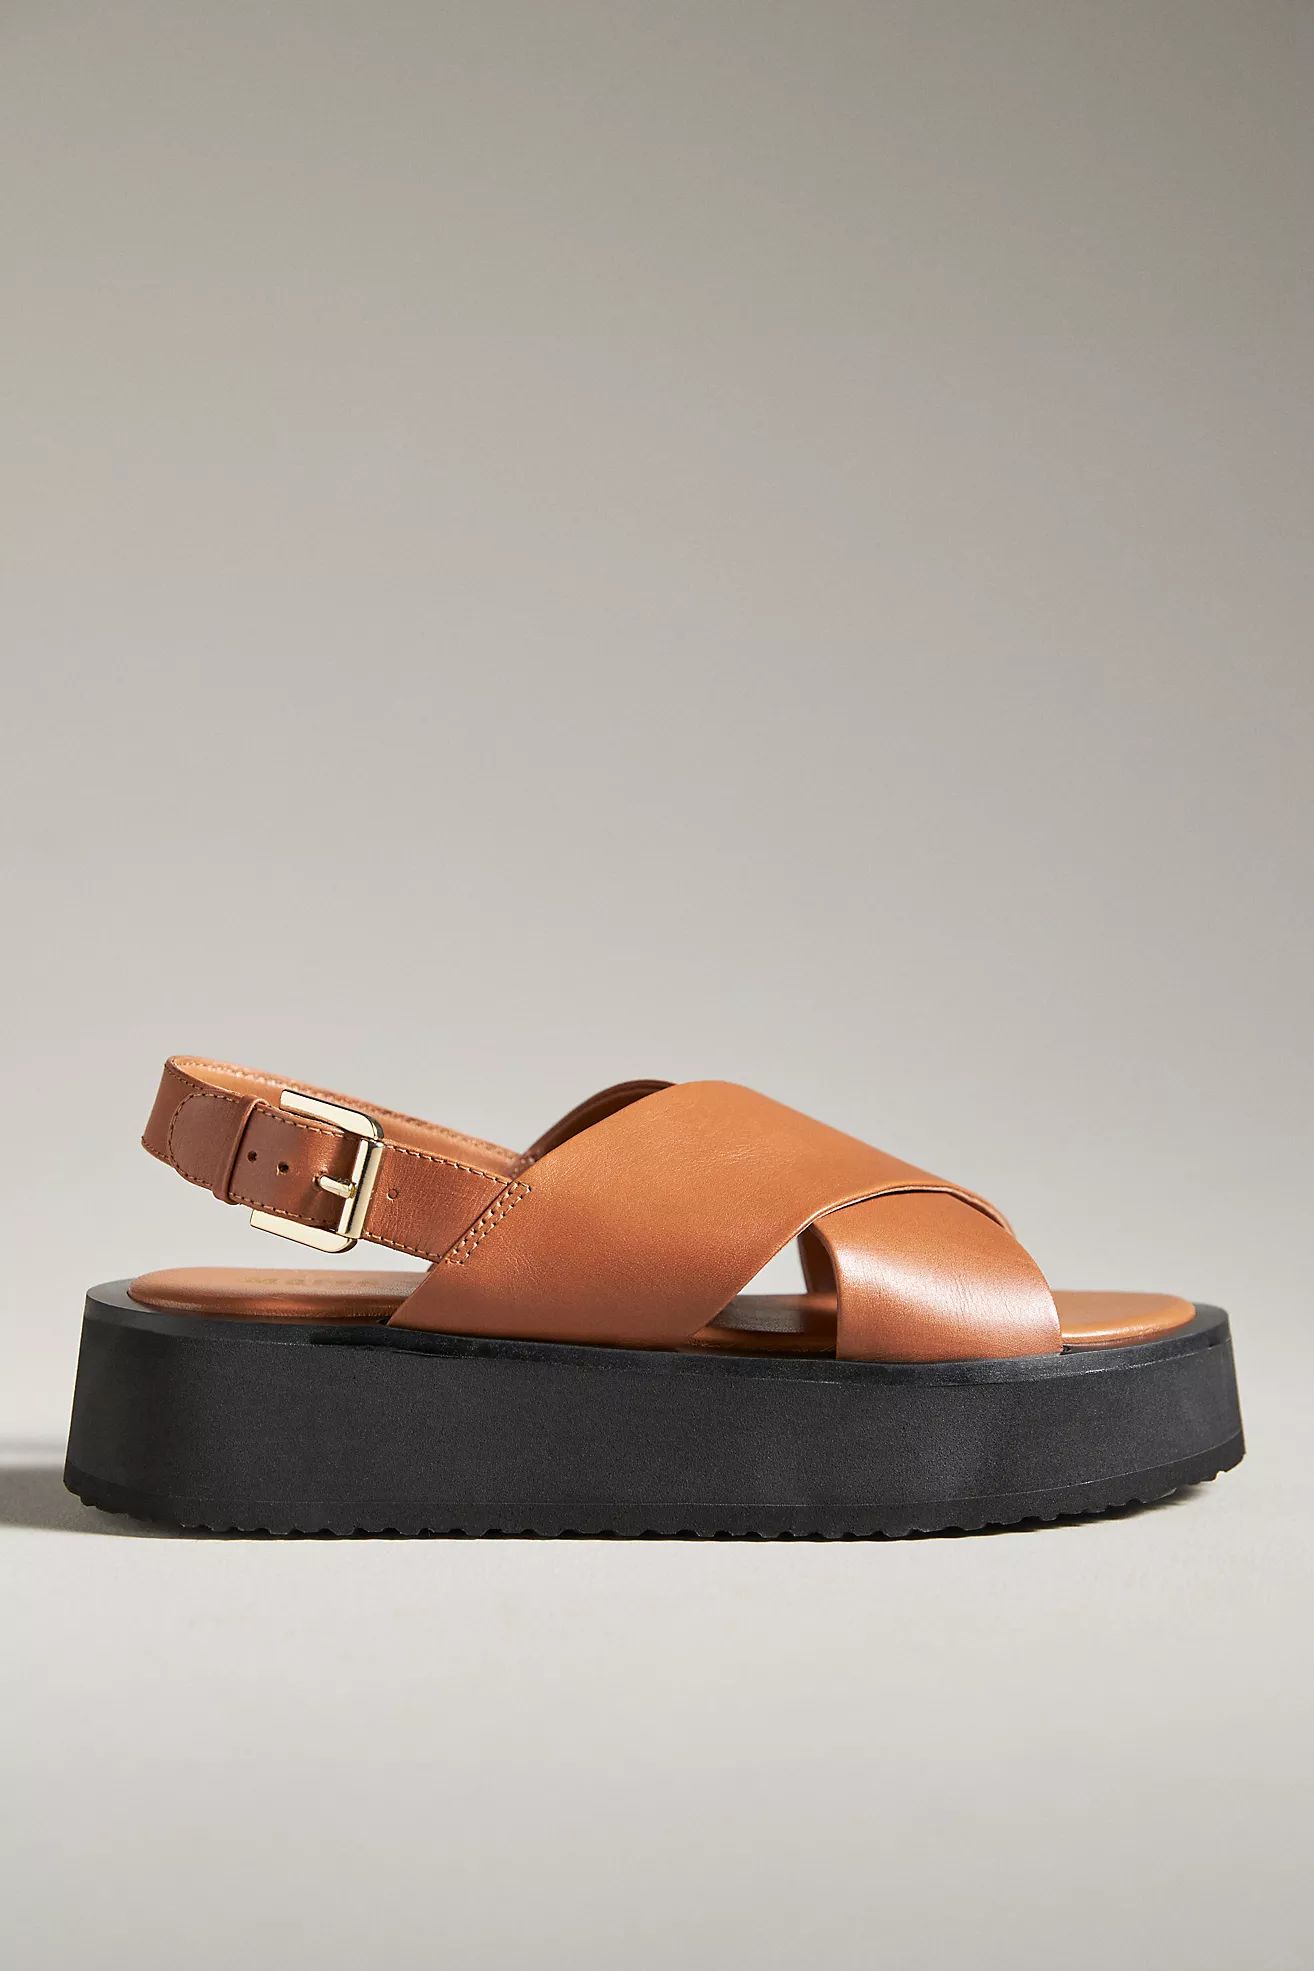 The Chrissy Platform Sandals by Maeve | Anthropologie (US)